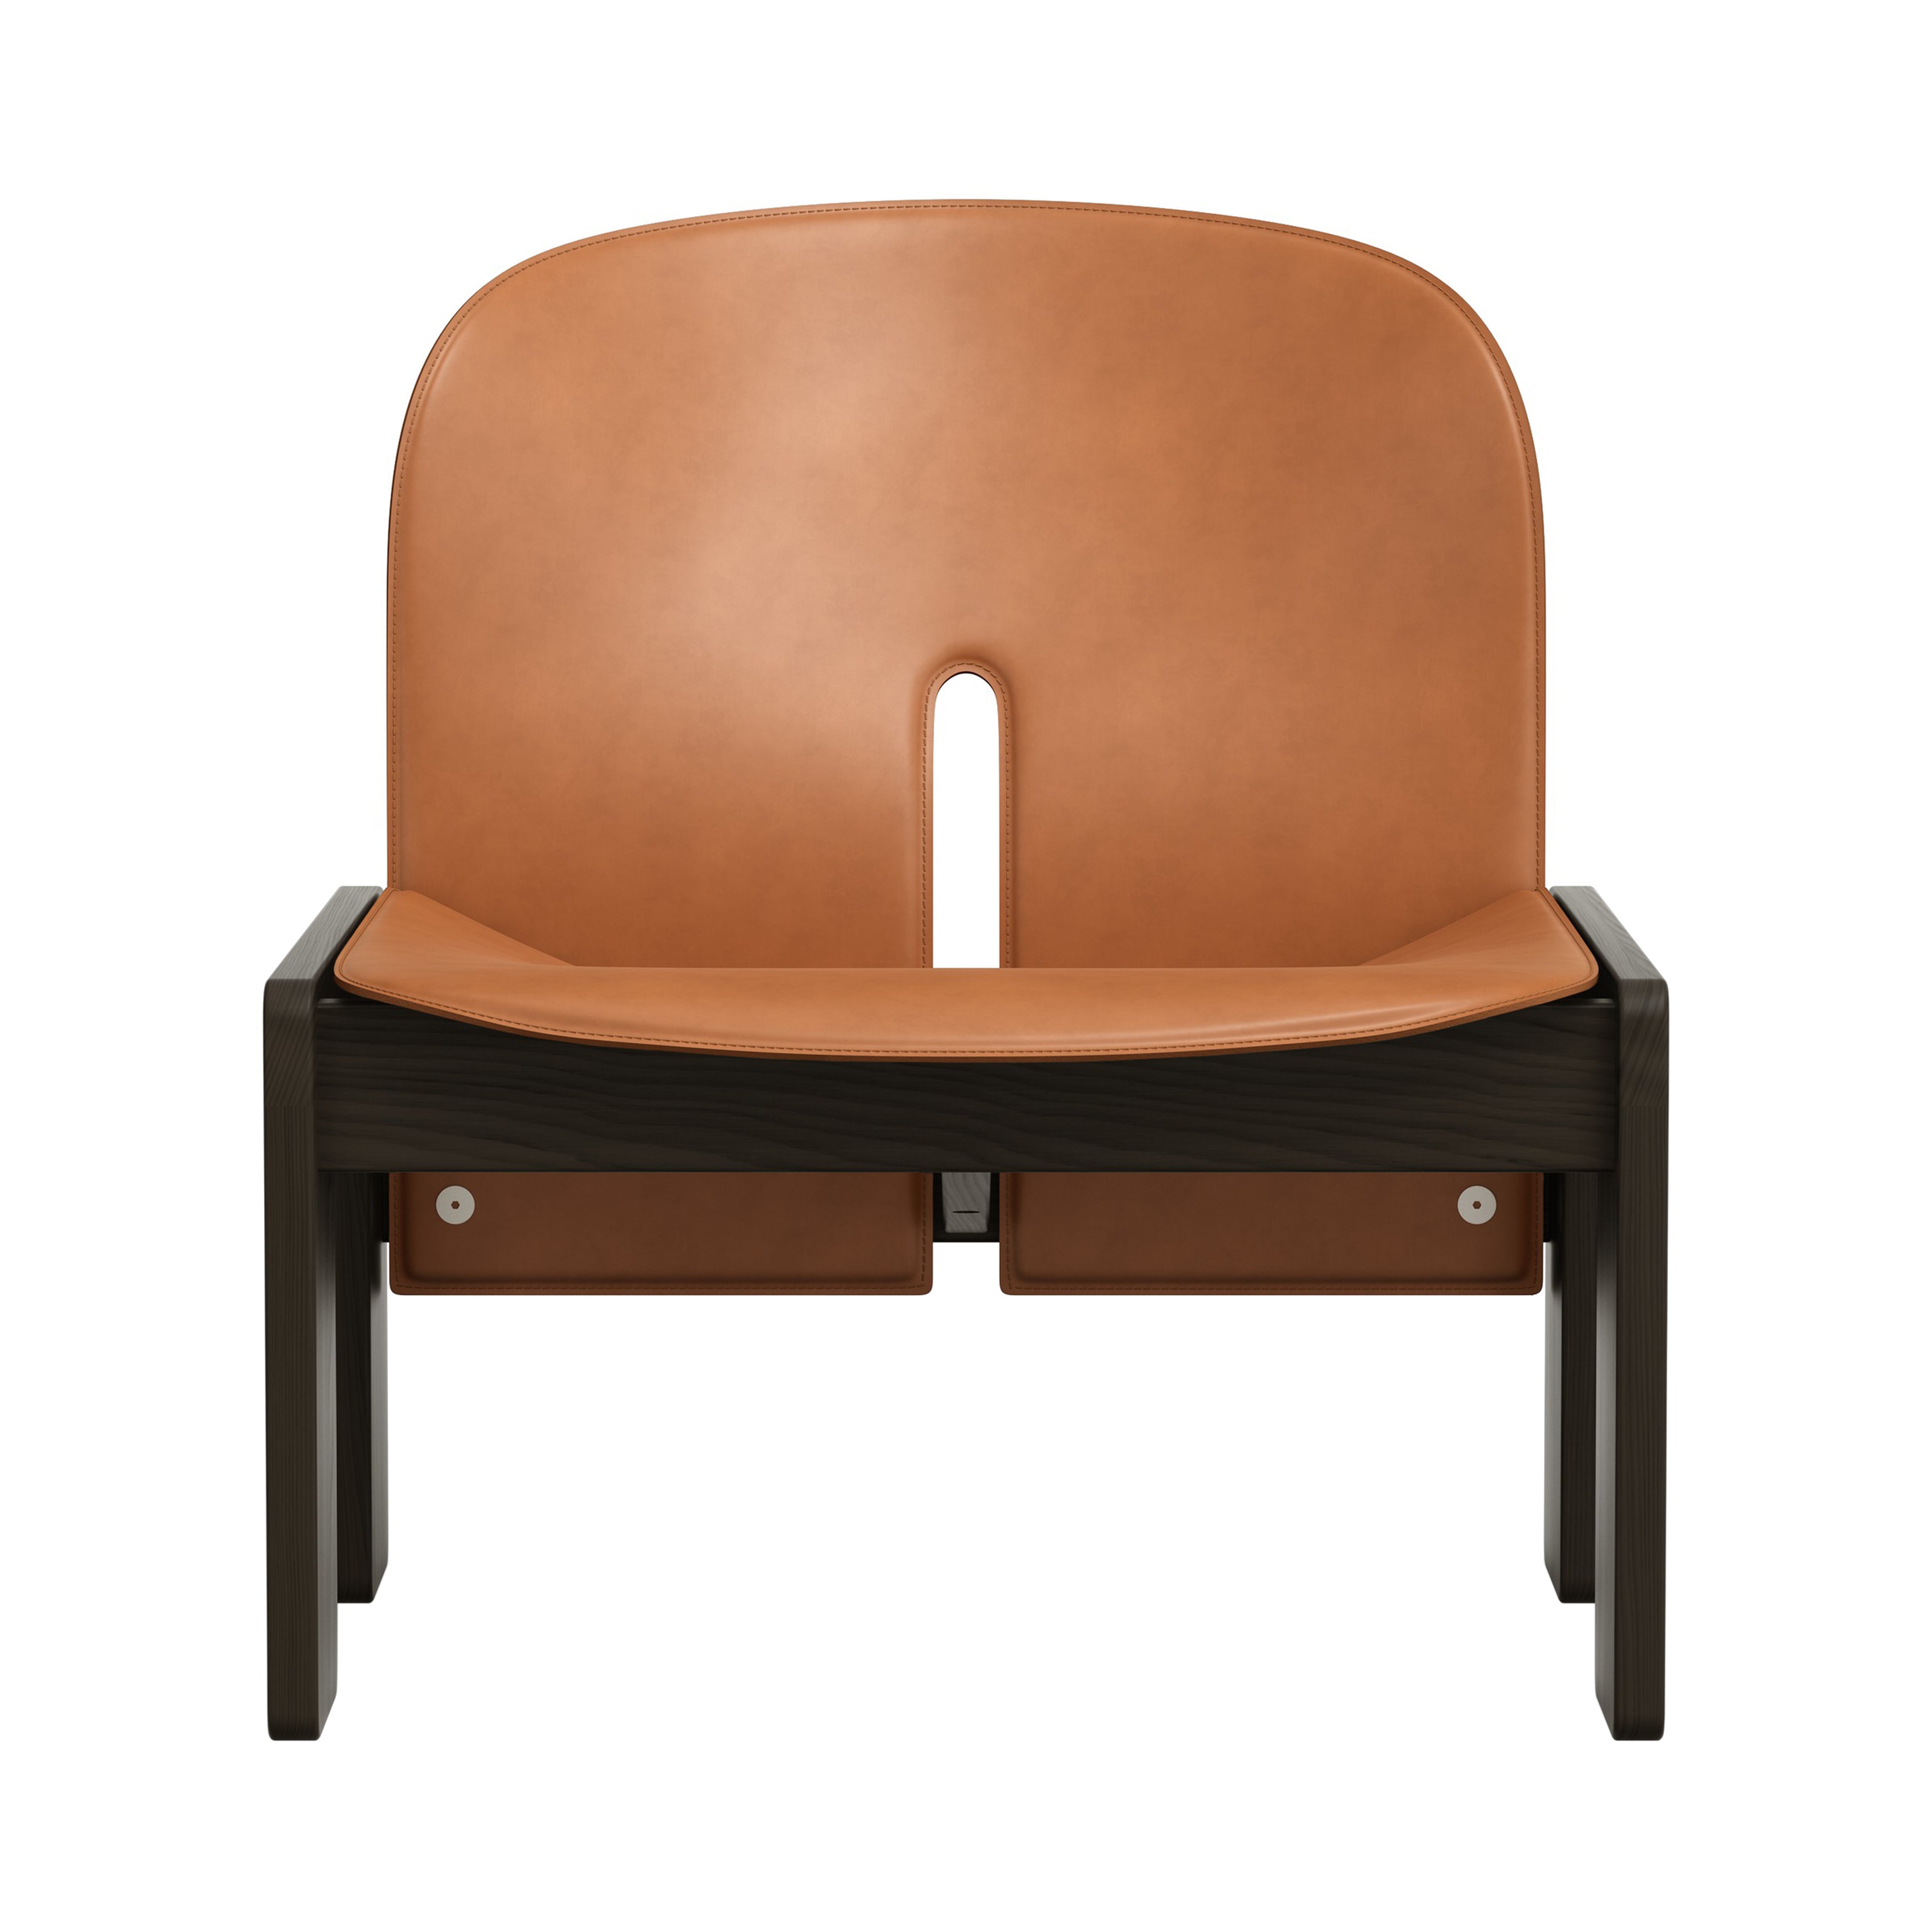 Scarpa 925 Lounge Chair: Mocca Stained Ash + Saddle Leather Cognac